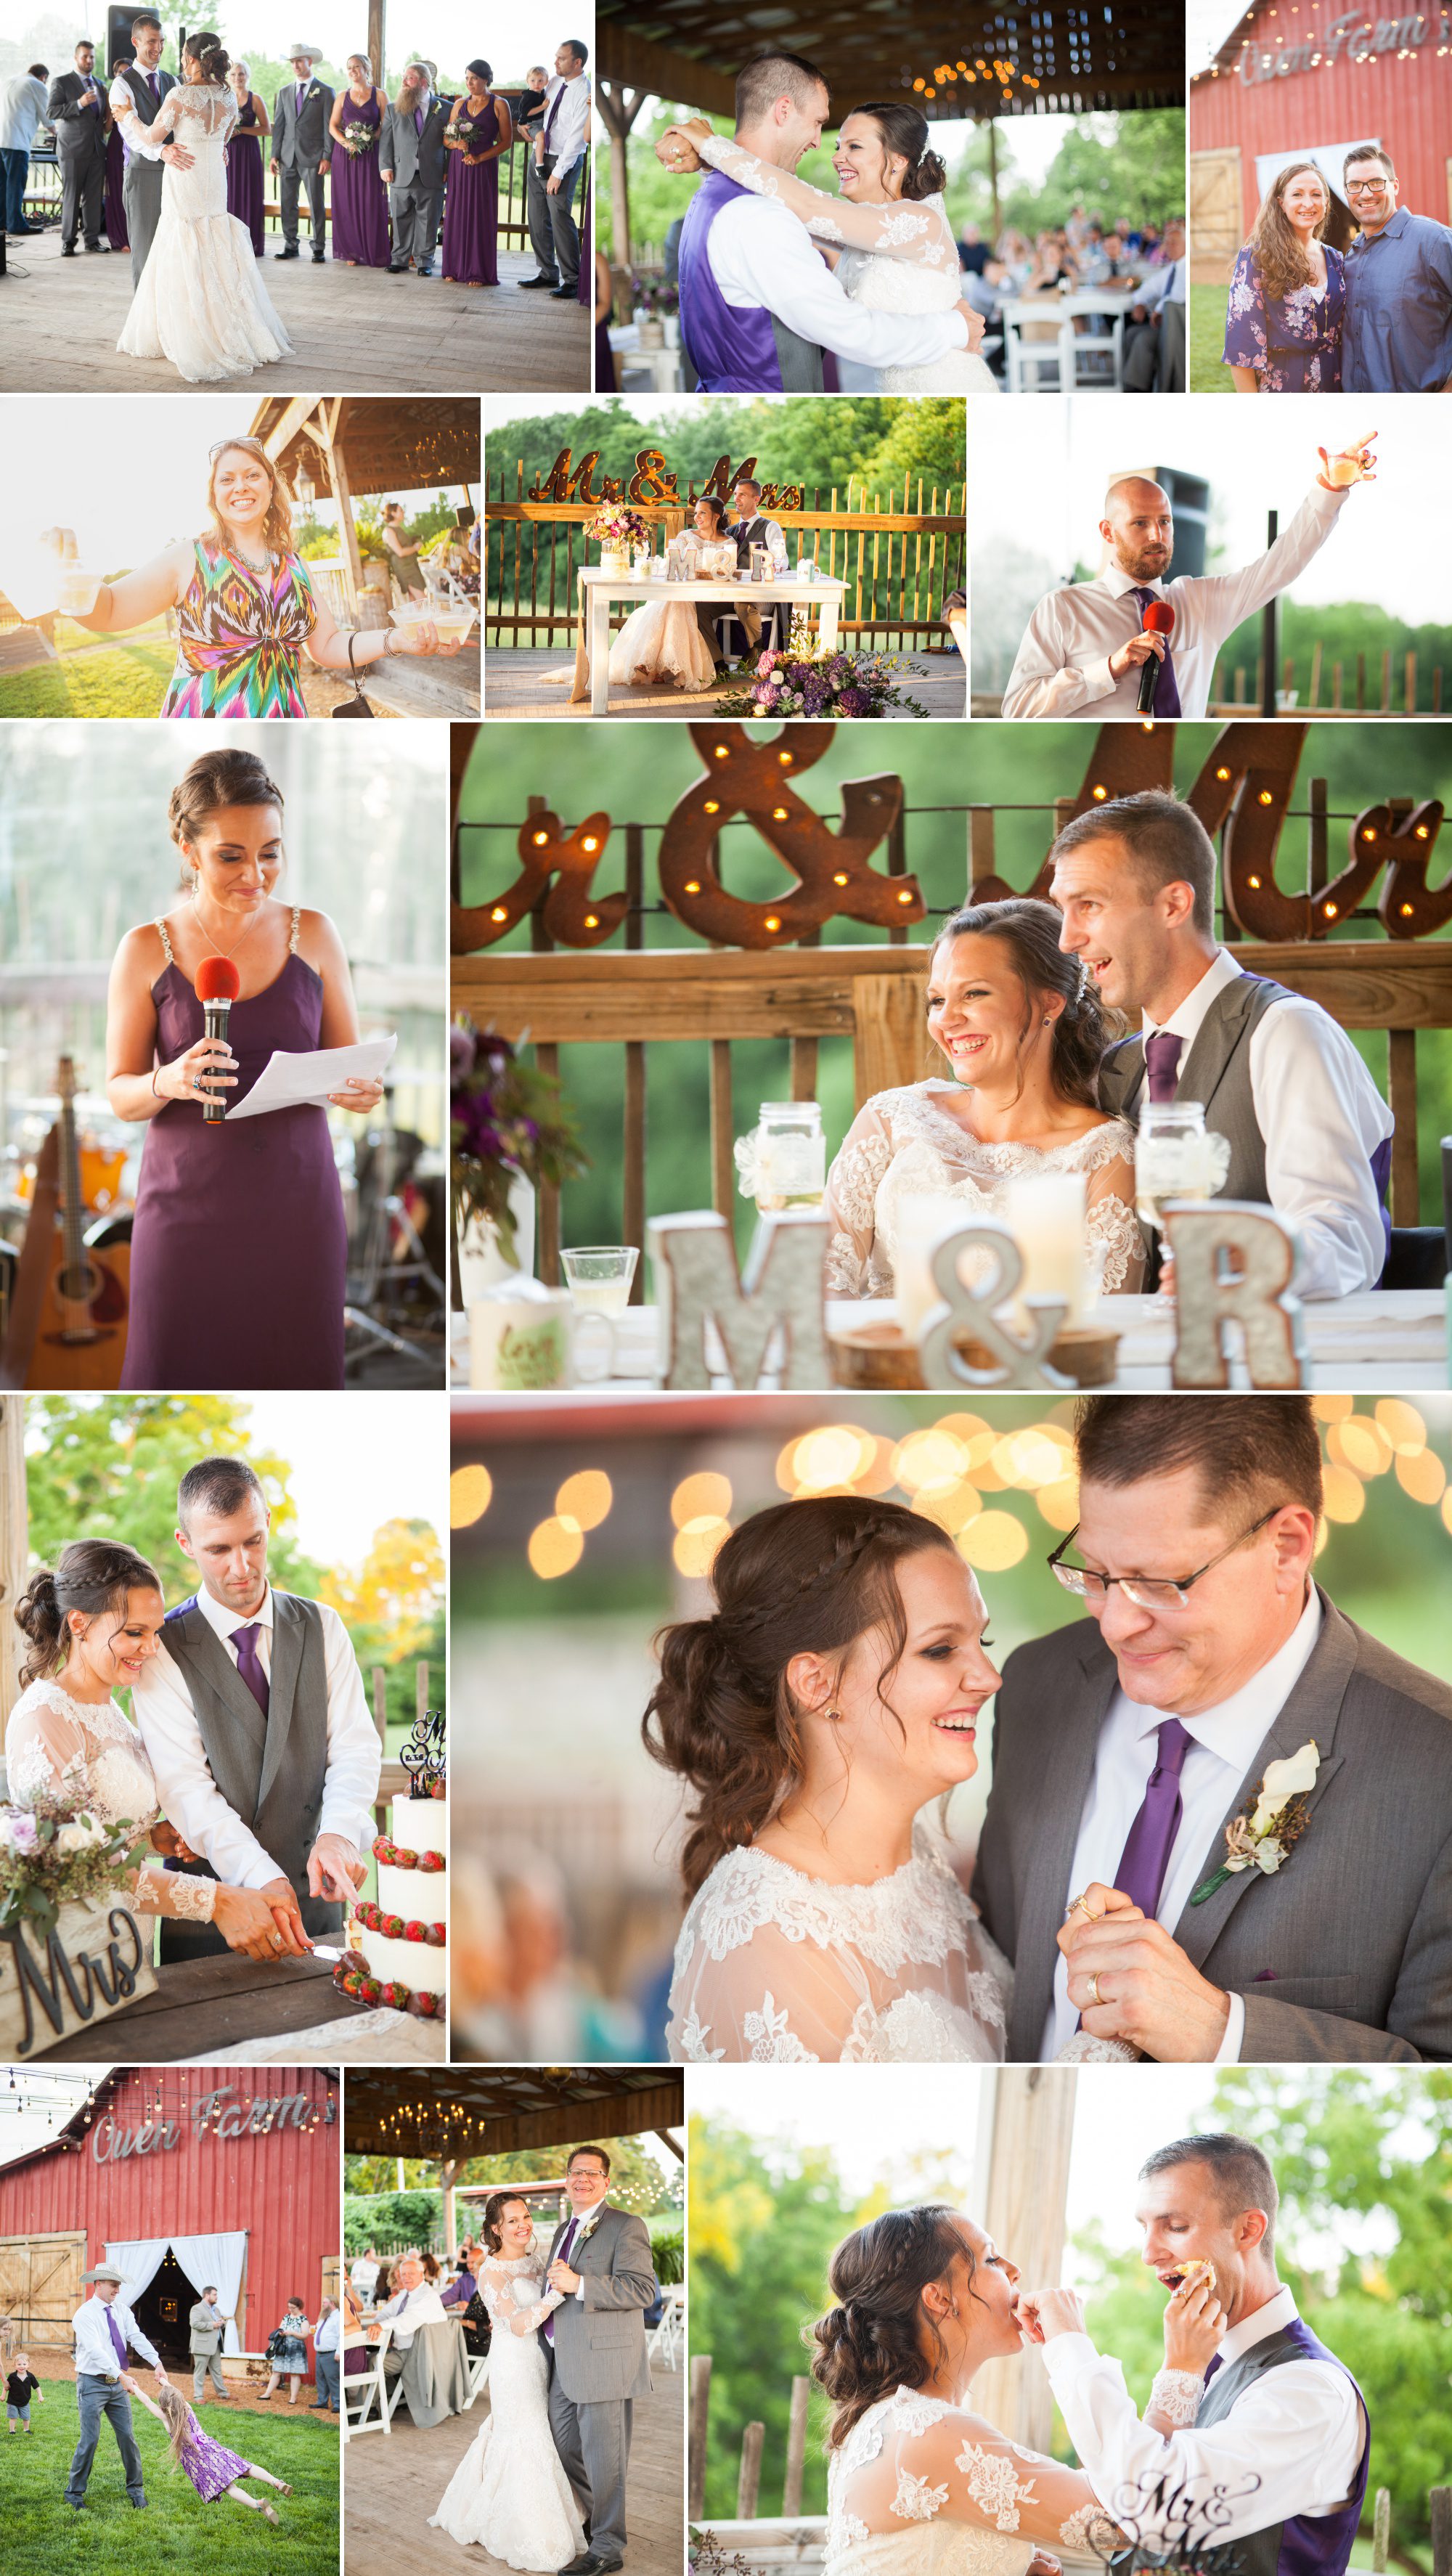 Bride and groom enjoy first dances with father of bride, wedding party does toasts at reception at summer wedding at Owen Farm in Chapmansboro, TN. Photography by Krista Lee Photography. 